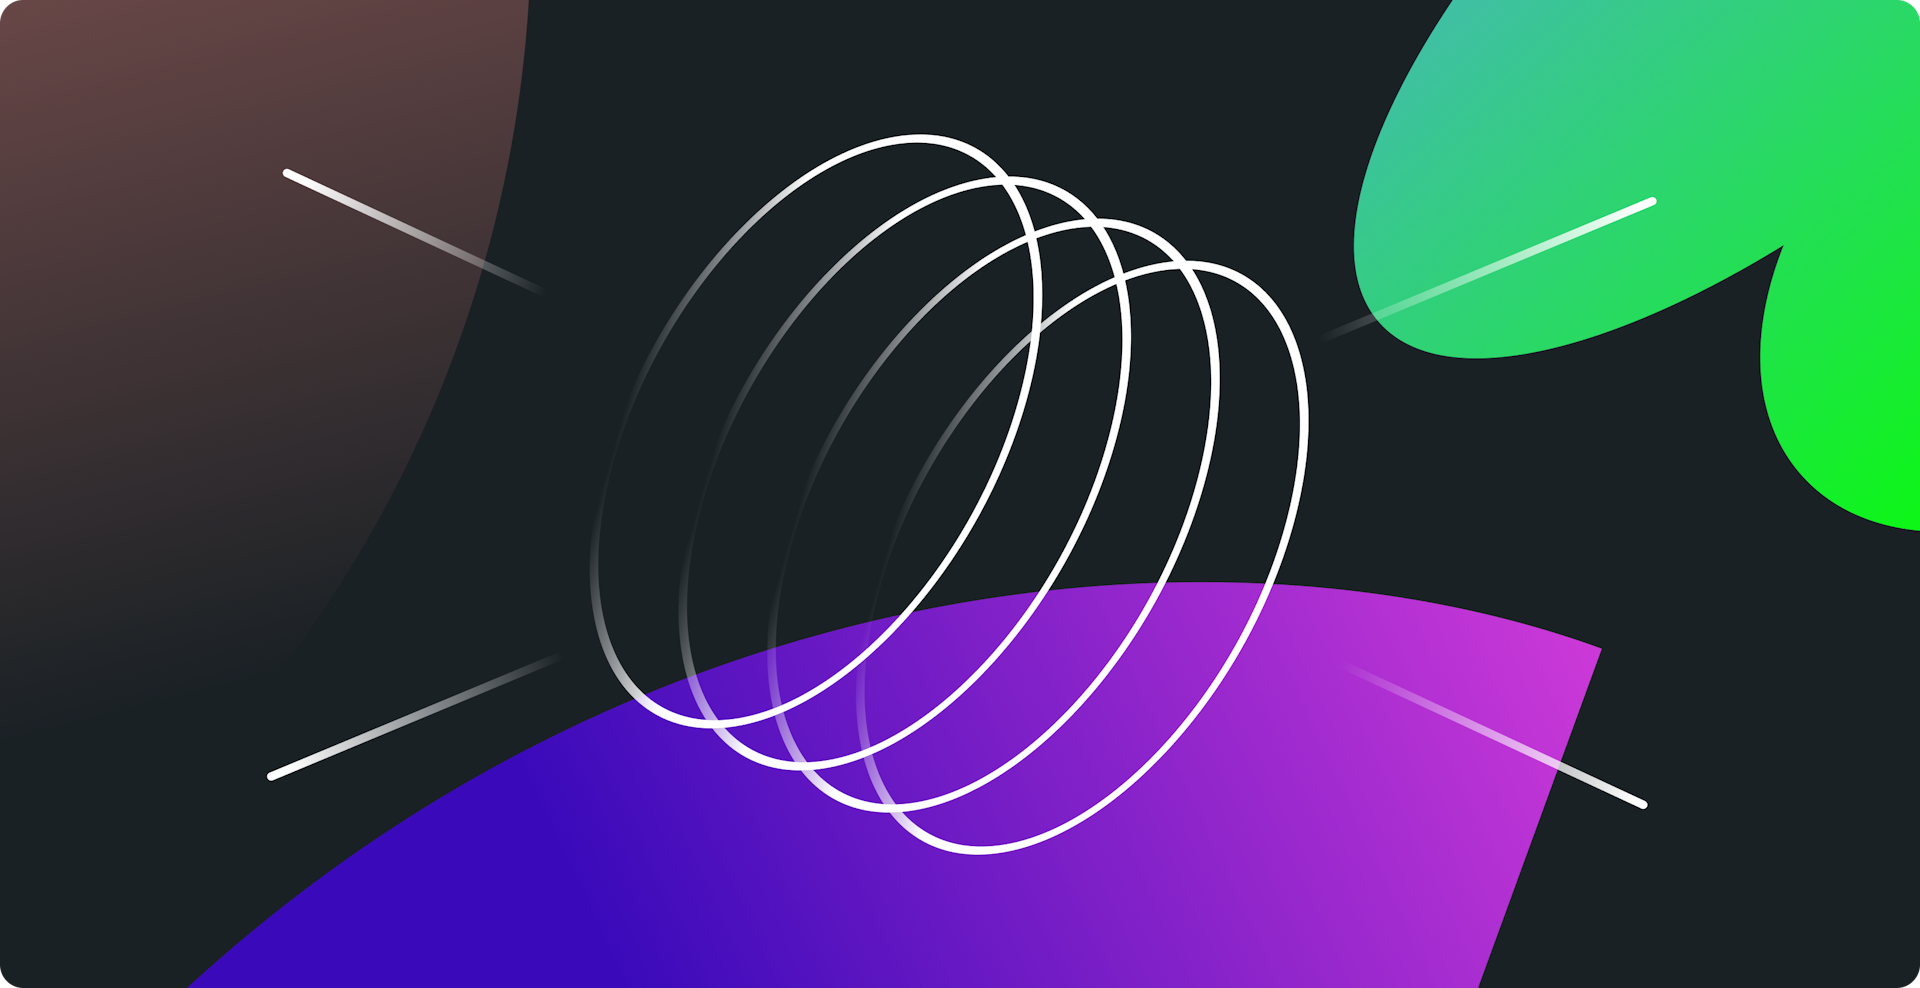 Stack of white circles and colorful shapes on a black background